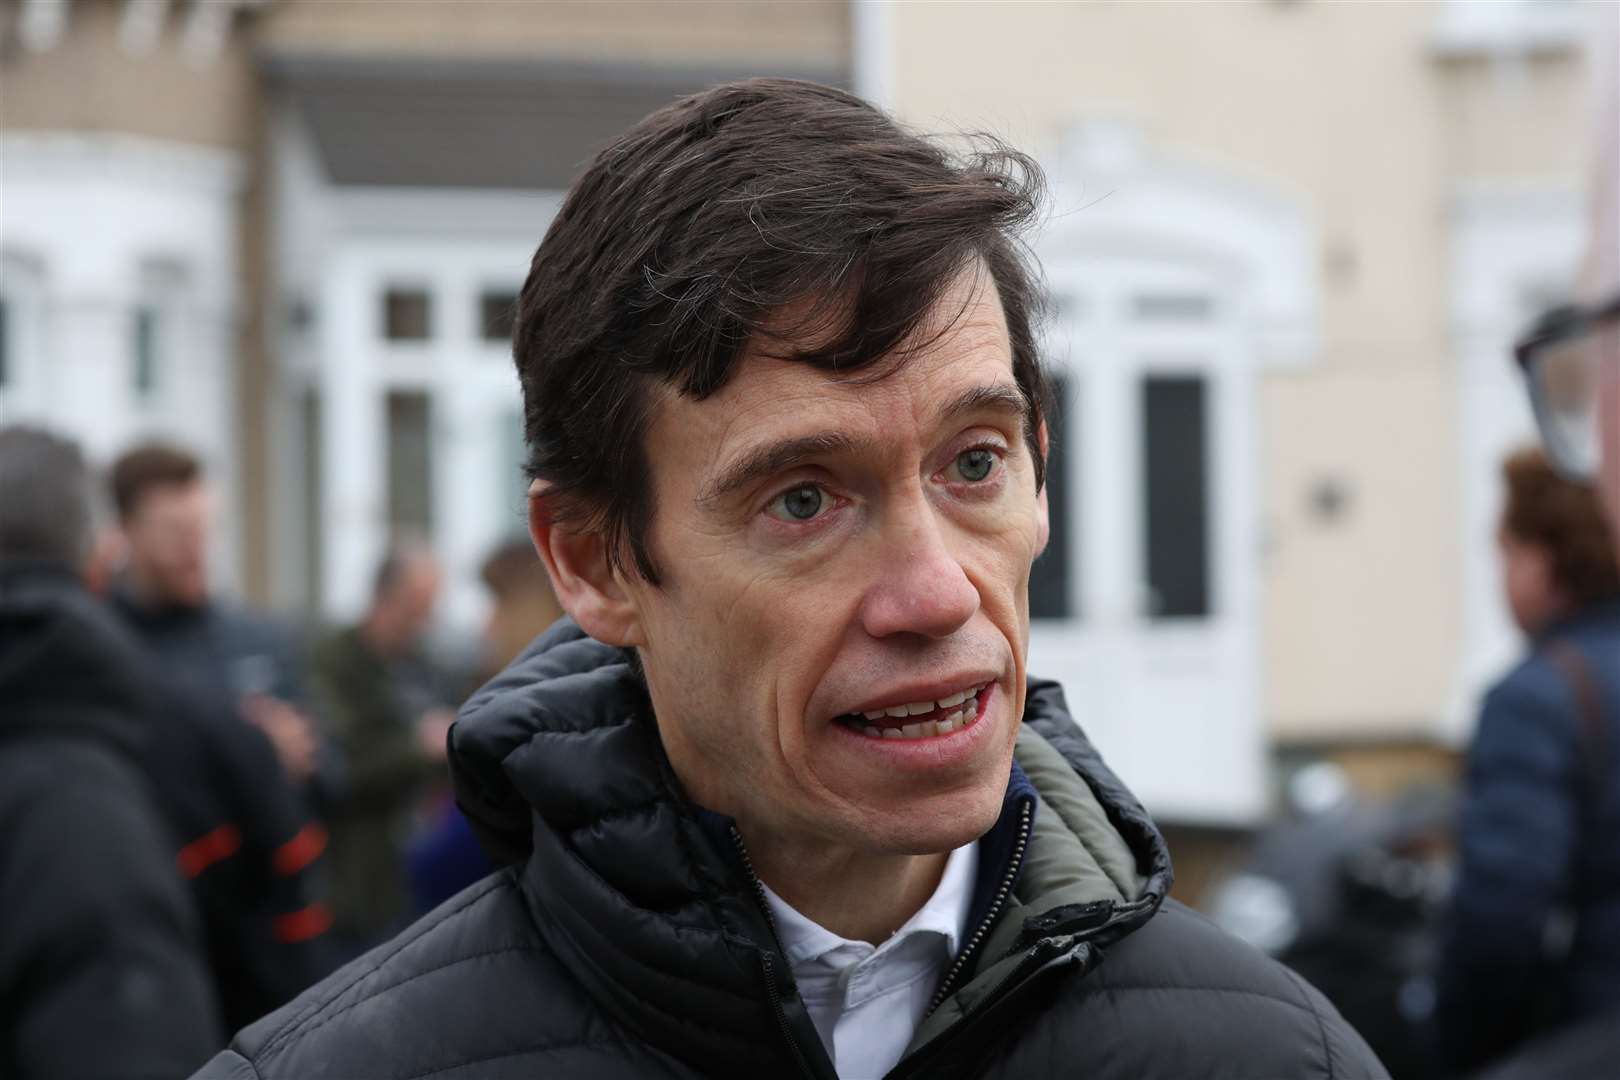 Former Tory MP Rory Stewart said he believes both major political parties are ‘basically old, dead and broken’ (Jonathan Brady/PA)